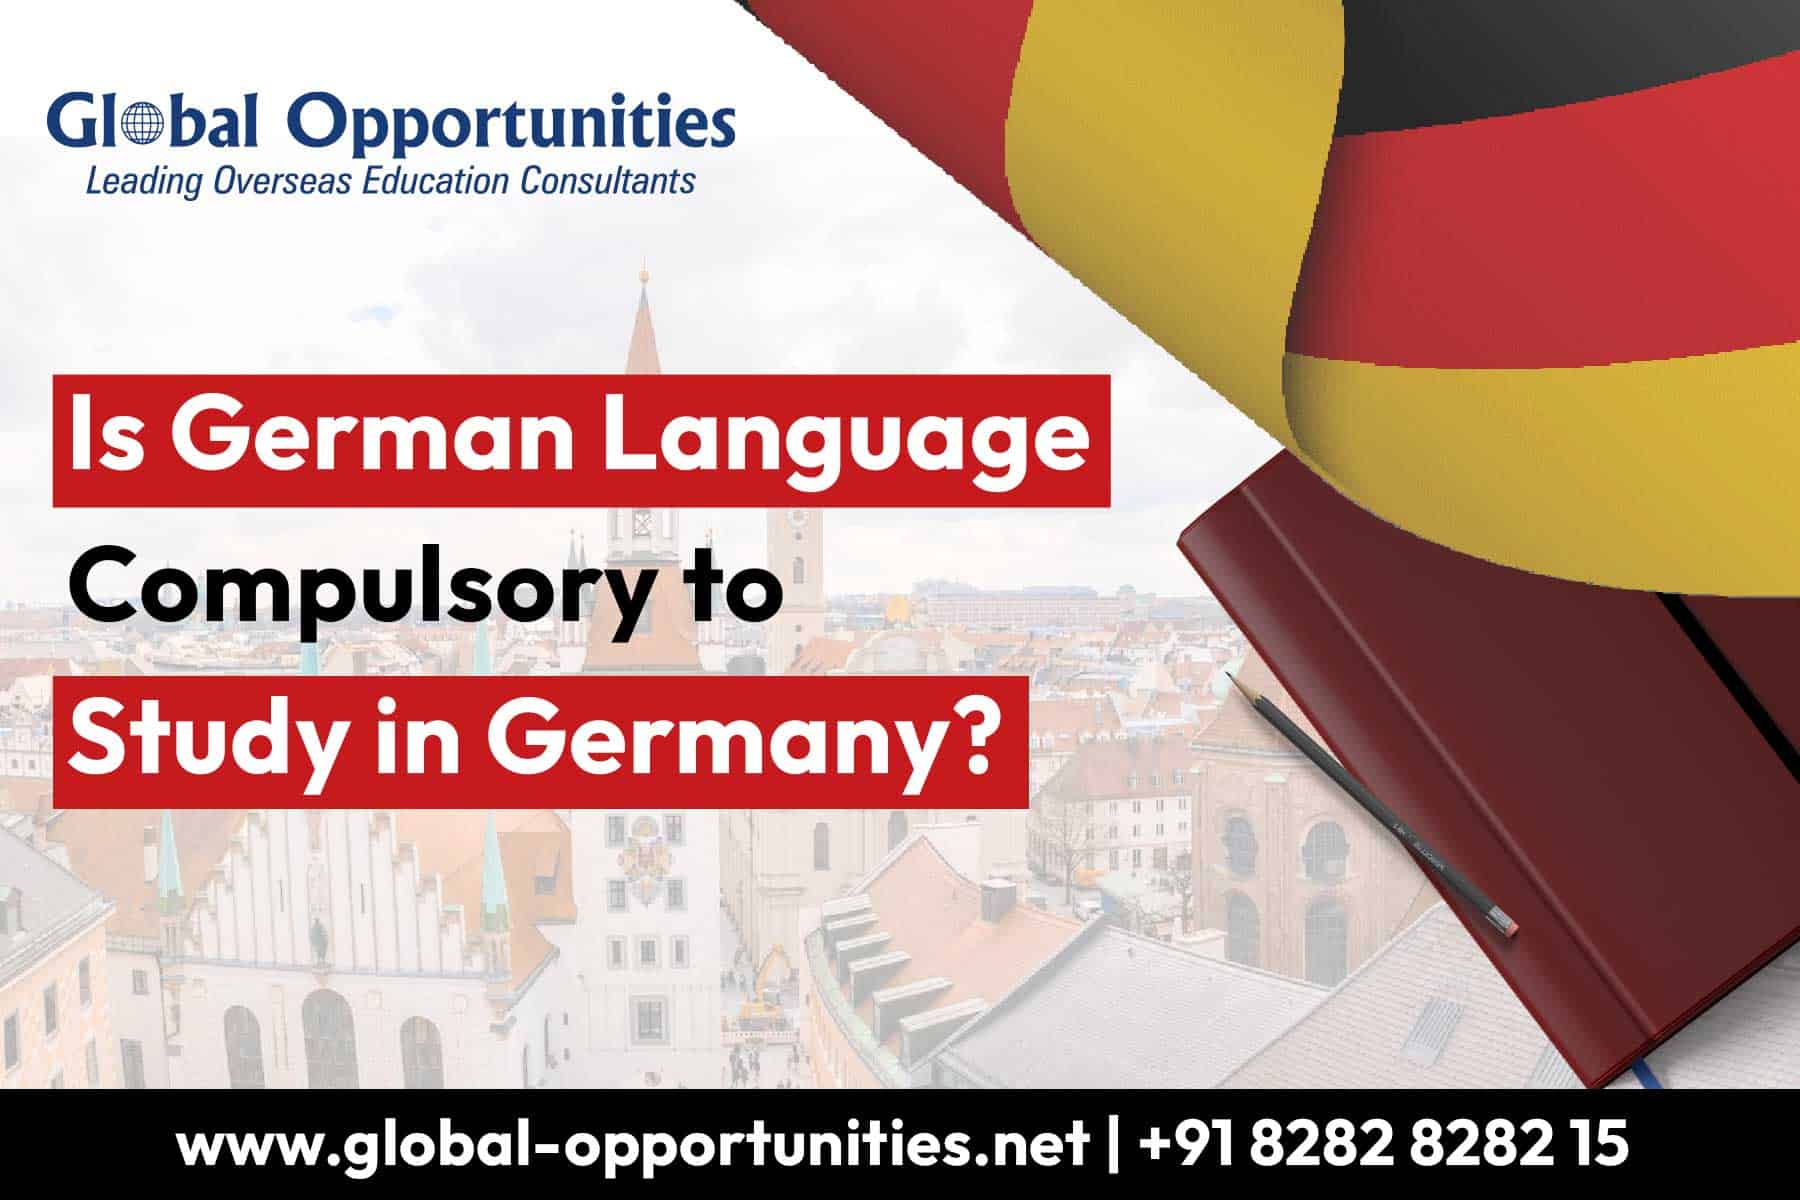 Is German Language Compulsory to Study in Germany